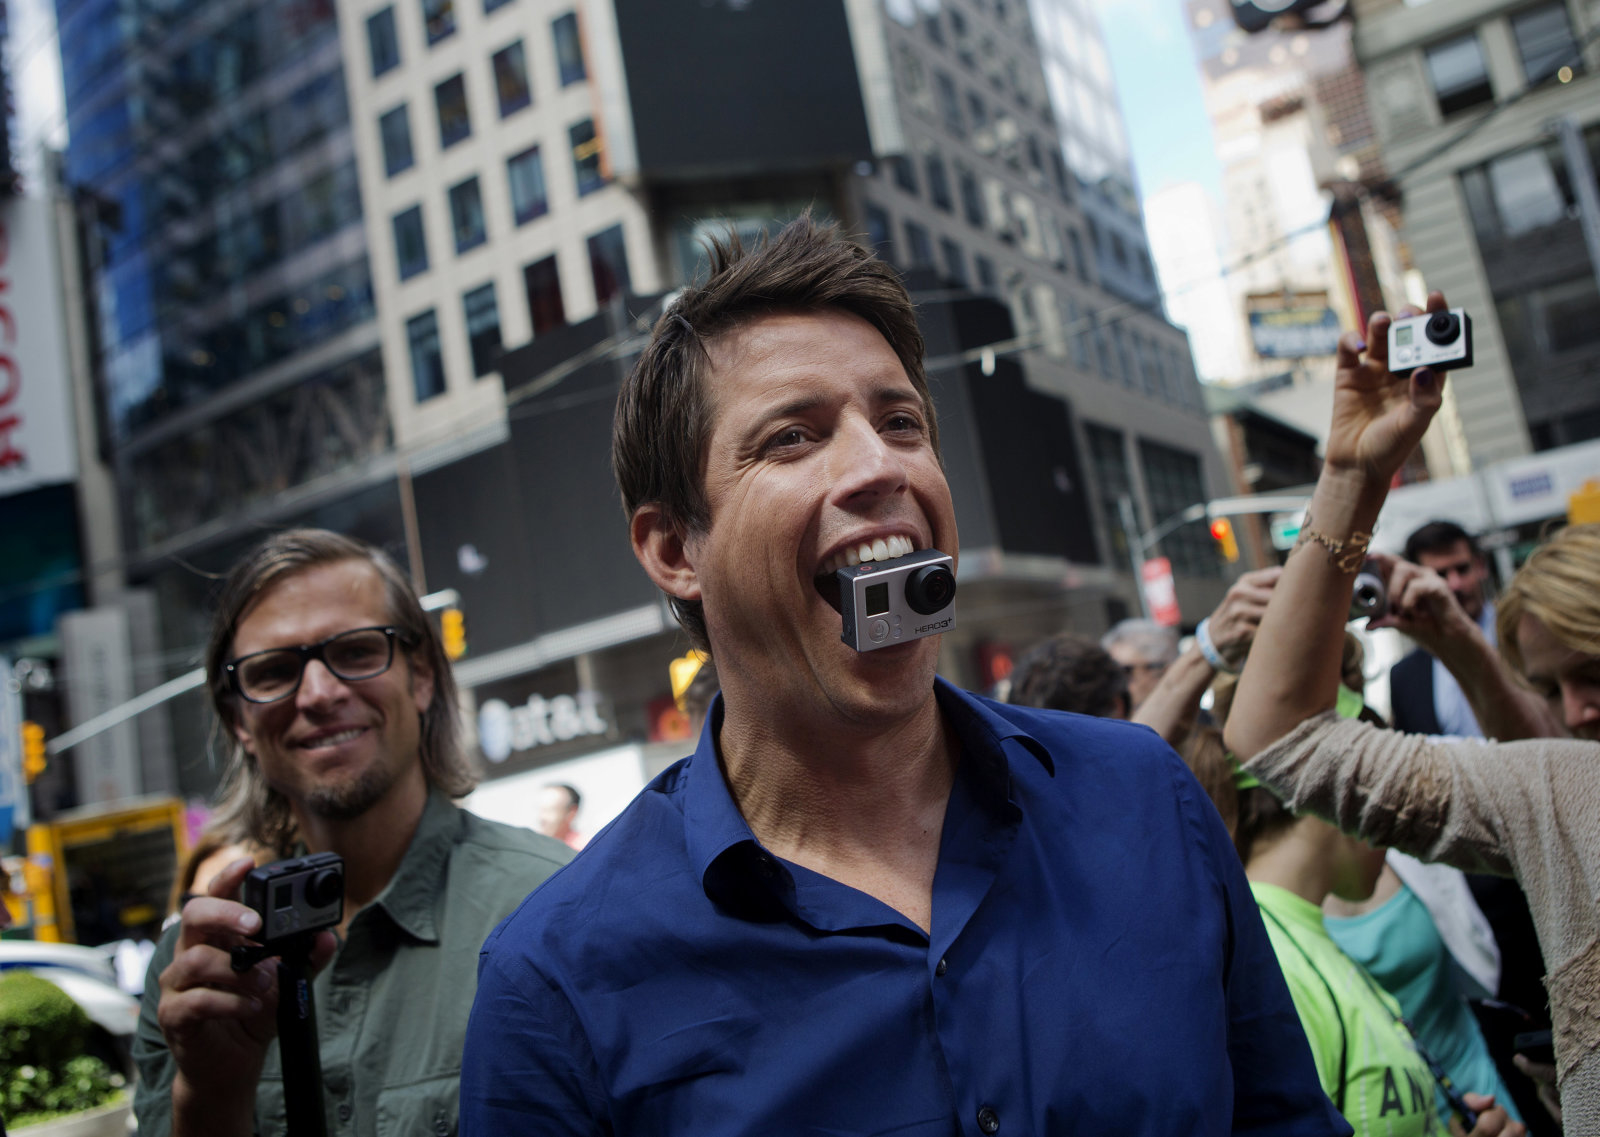 Bloomberg's Best Photos 2014: Nick Woodman, founder and chief executive officer of GoPro Inc., stands for a photograph with a GoPro Hero 3+ camera in his mouth after ringing the opening bell for the release of the company's IPO at the Nasdaq MarketSite in New York, U.S., on Thursday, June 26, 2014. GoPro Inc., whose cameras let surfers, skiers and sky divers record their exploits, rose in its trading debut after pricing its initial public offering at the top of the marketed range. Photographer: Victor J. Blue/Bloomberg via Getty Images 